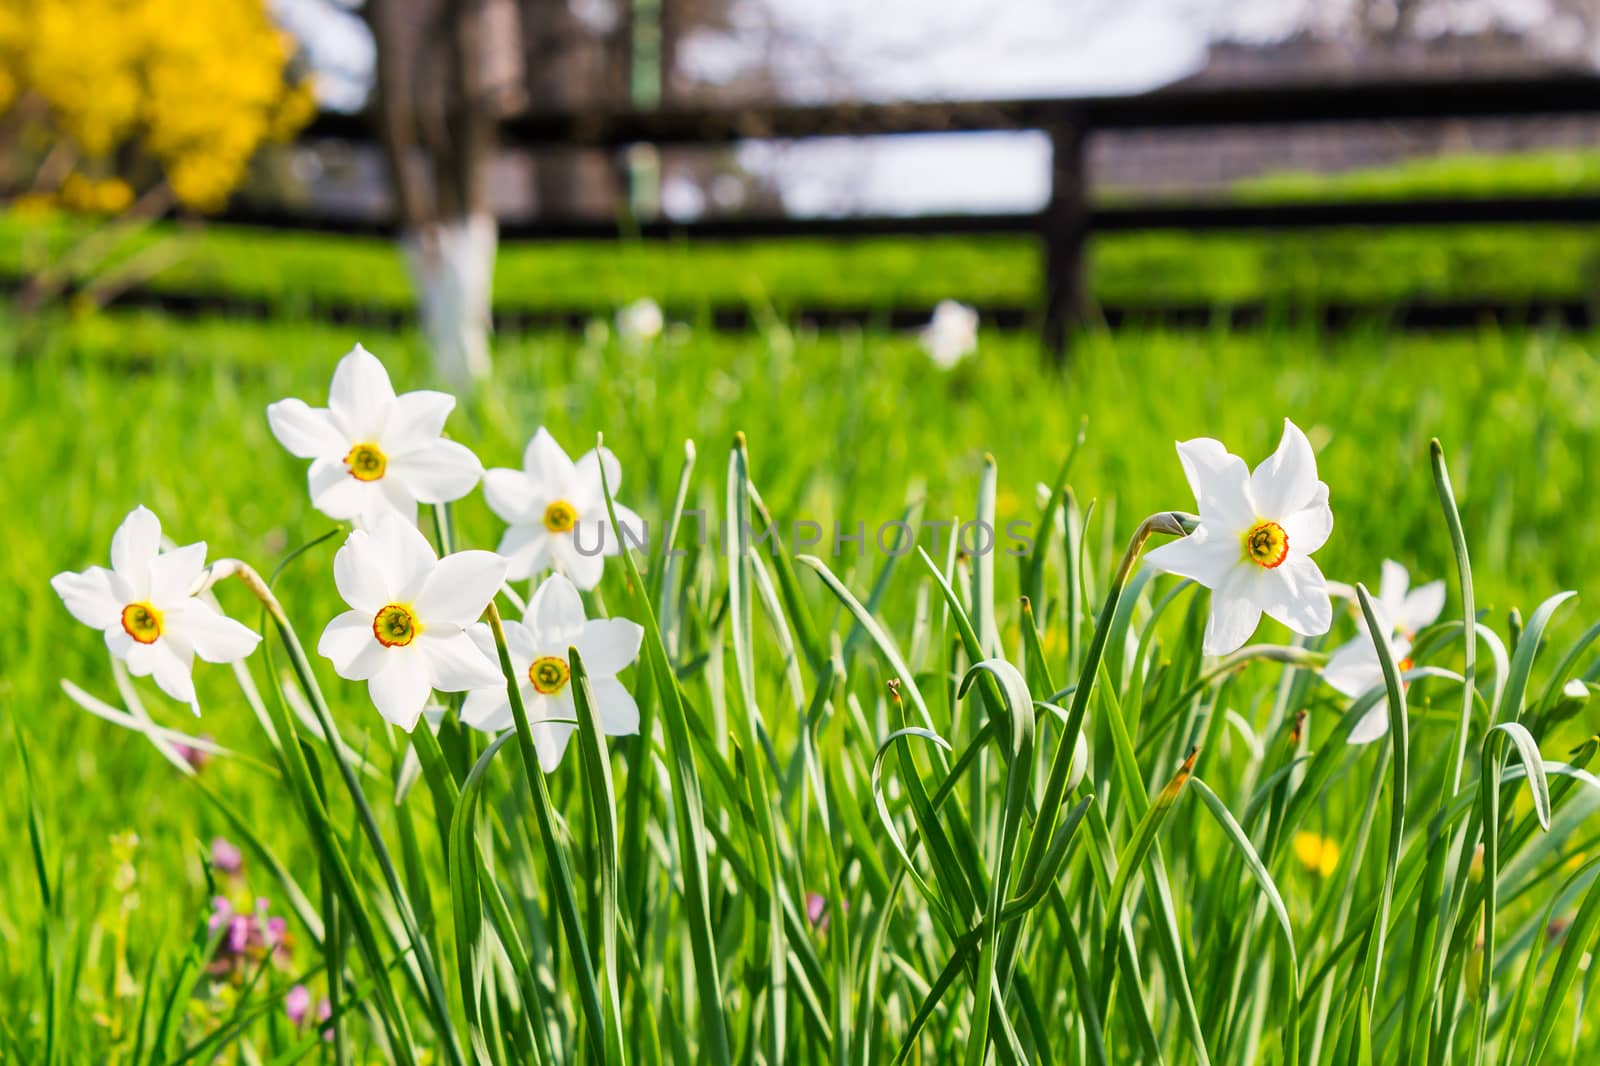 wild narcissus in grass by Pellinni